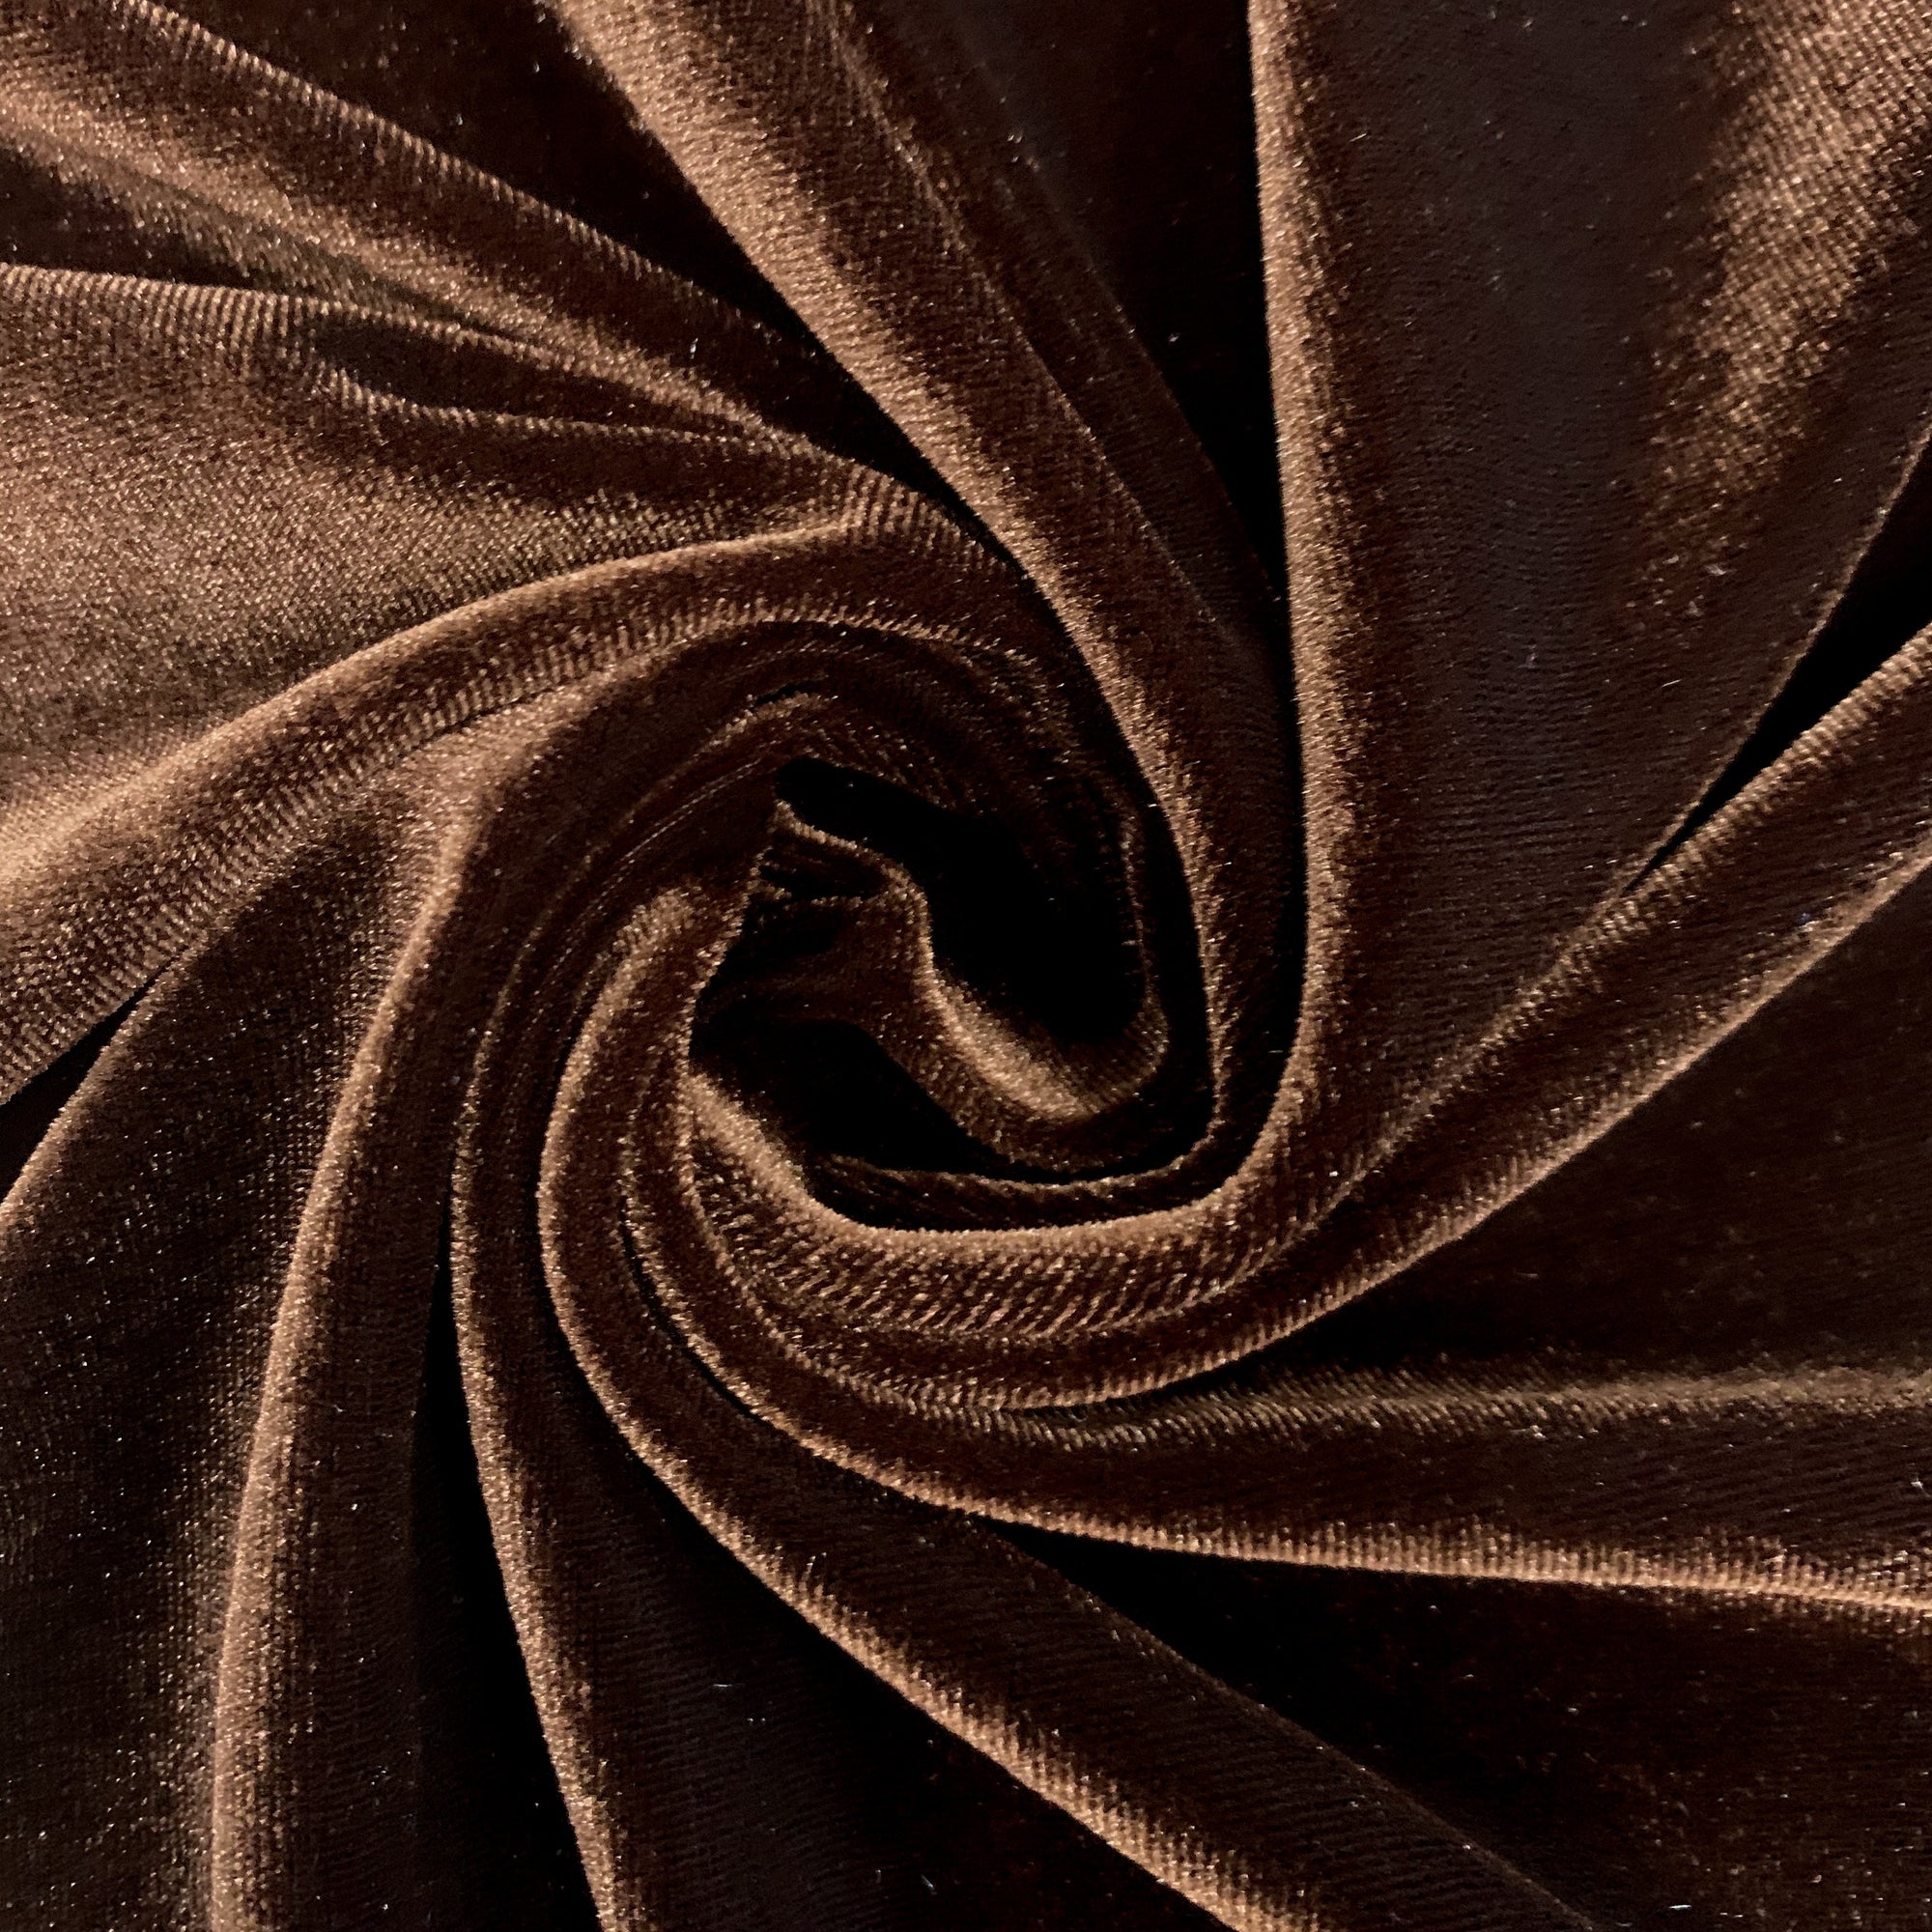 Princess BROWN Polyester Stretch Velvet Fabric for Bows, Top Knots, Head Wraps, Scrunchies, Clothes, Costumes, Crafts